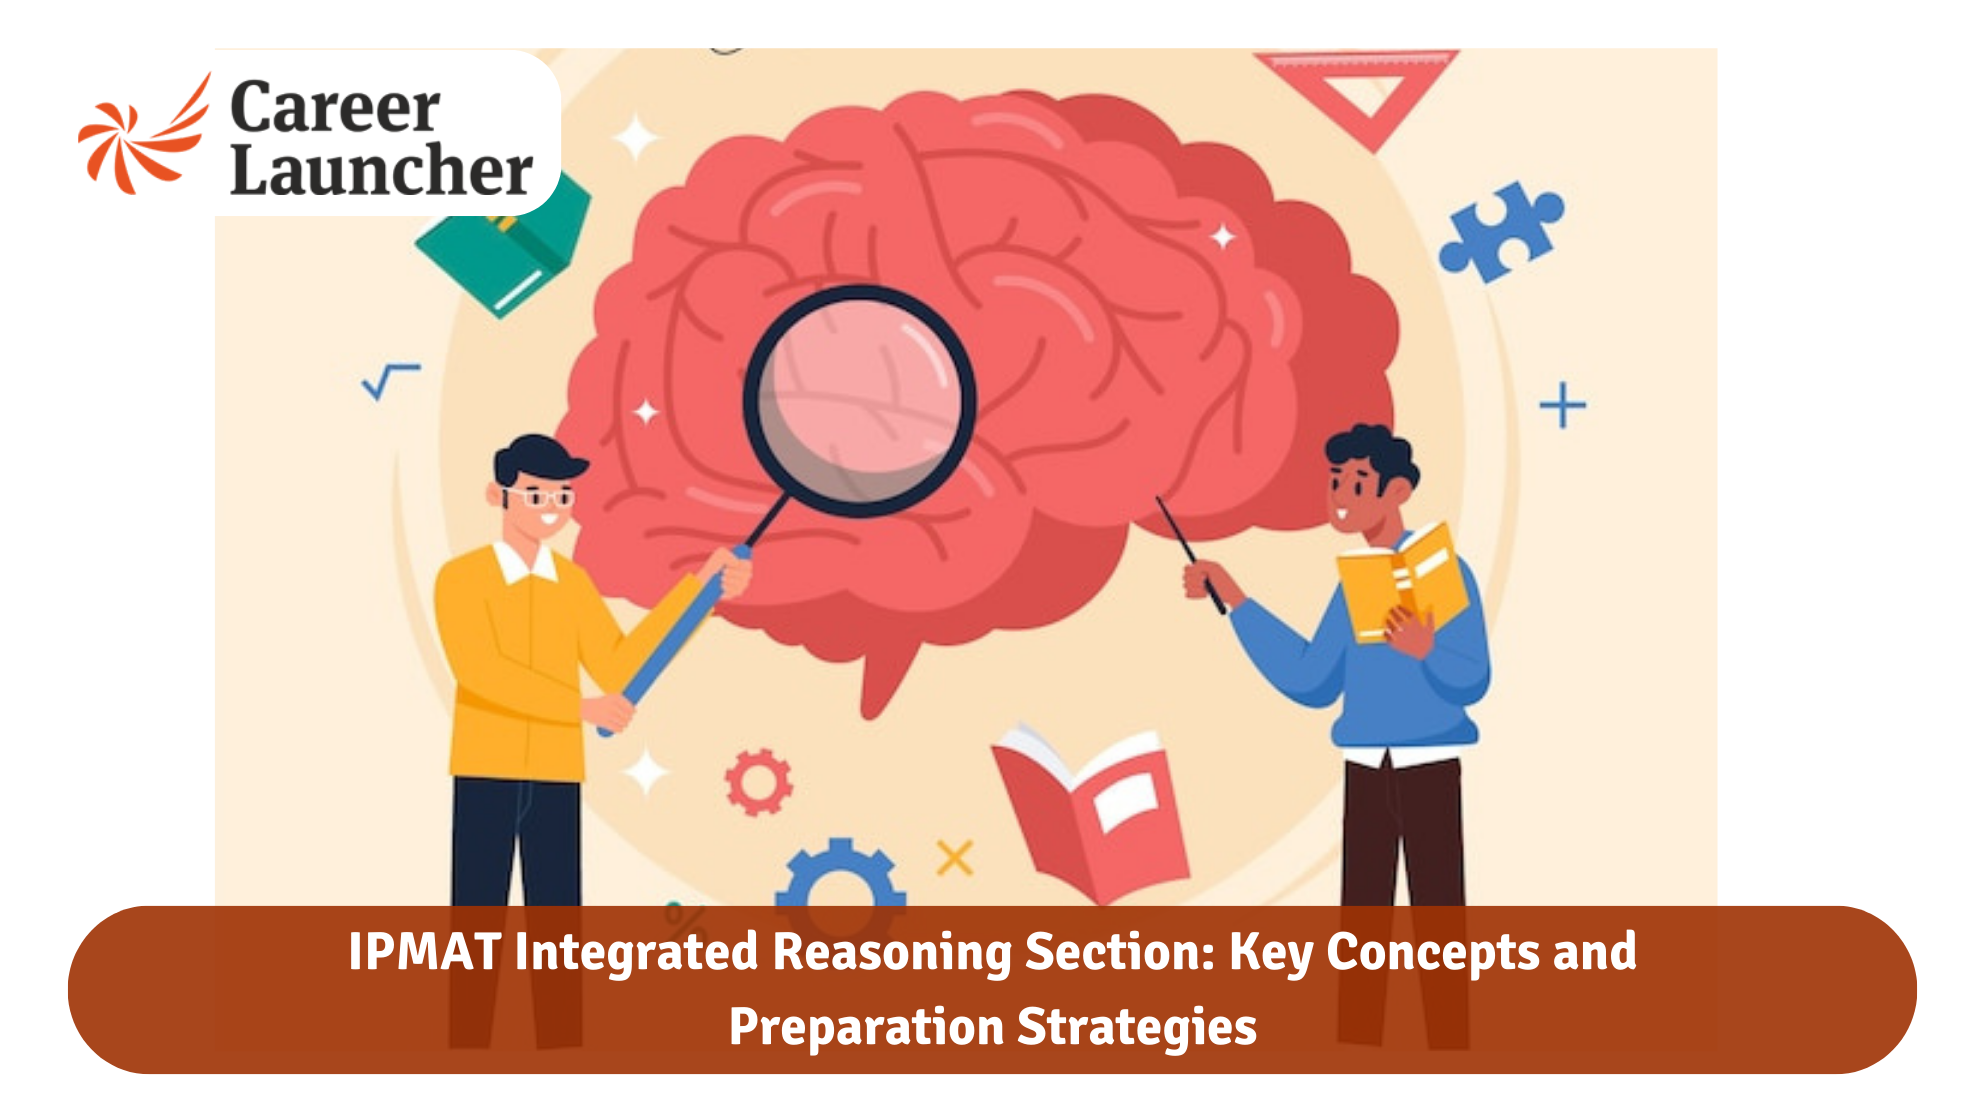 IPMAT Integrated Reasoning Section: Key Concepts and Preparation Strategies